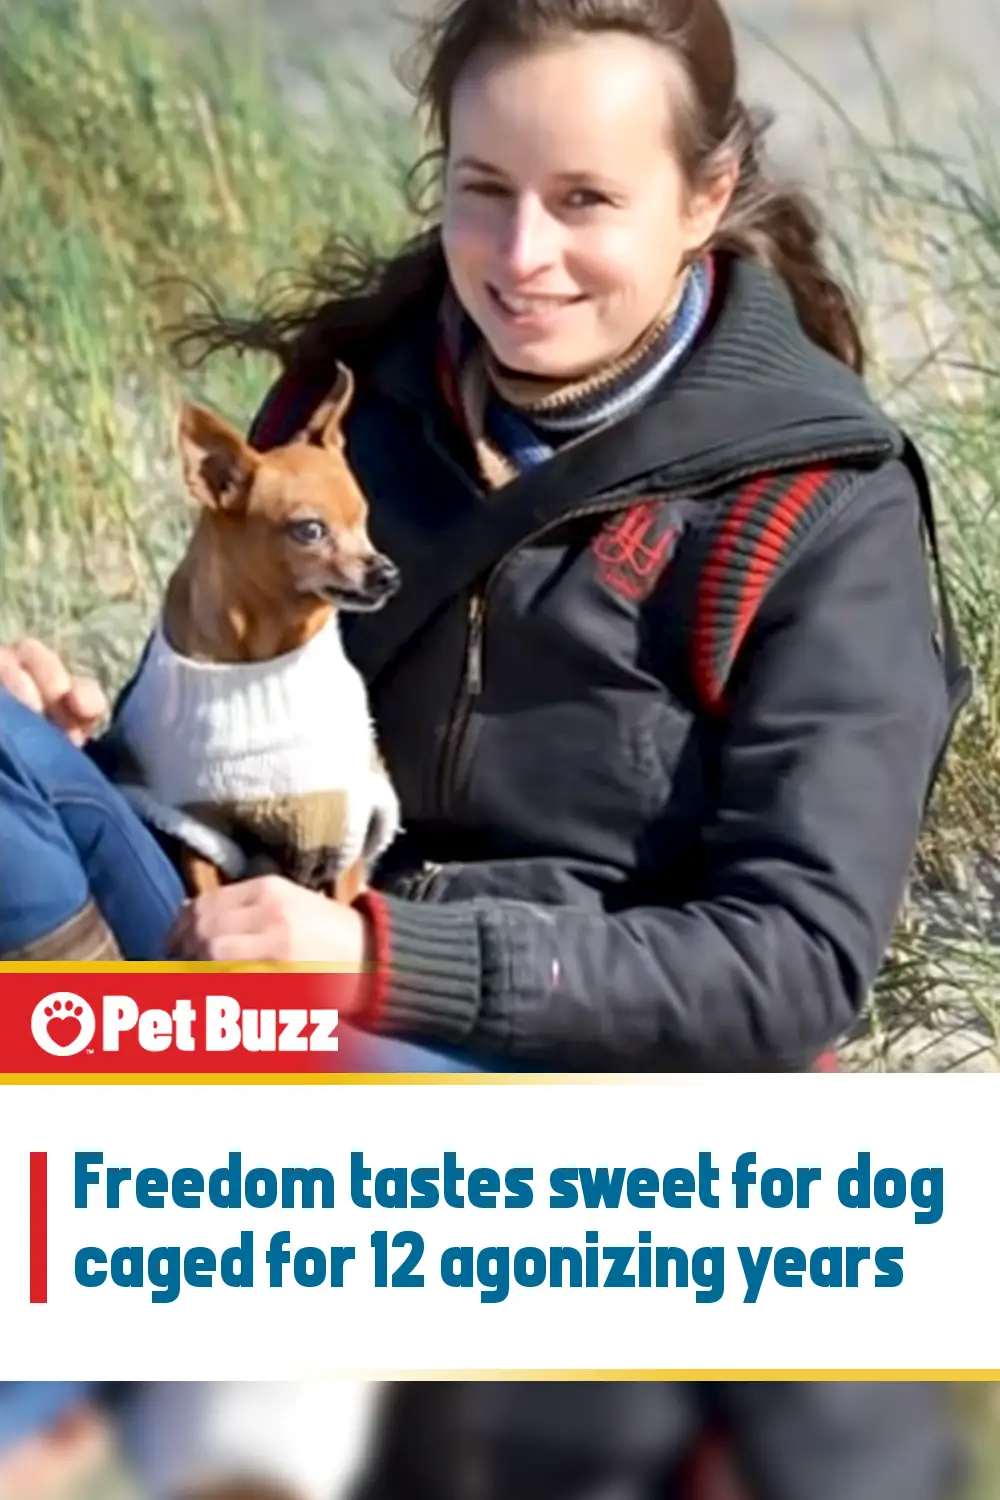 Freedom tastes sweet for dog caged for 12 agonizing years